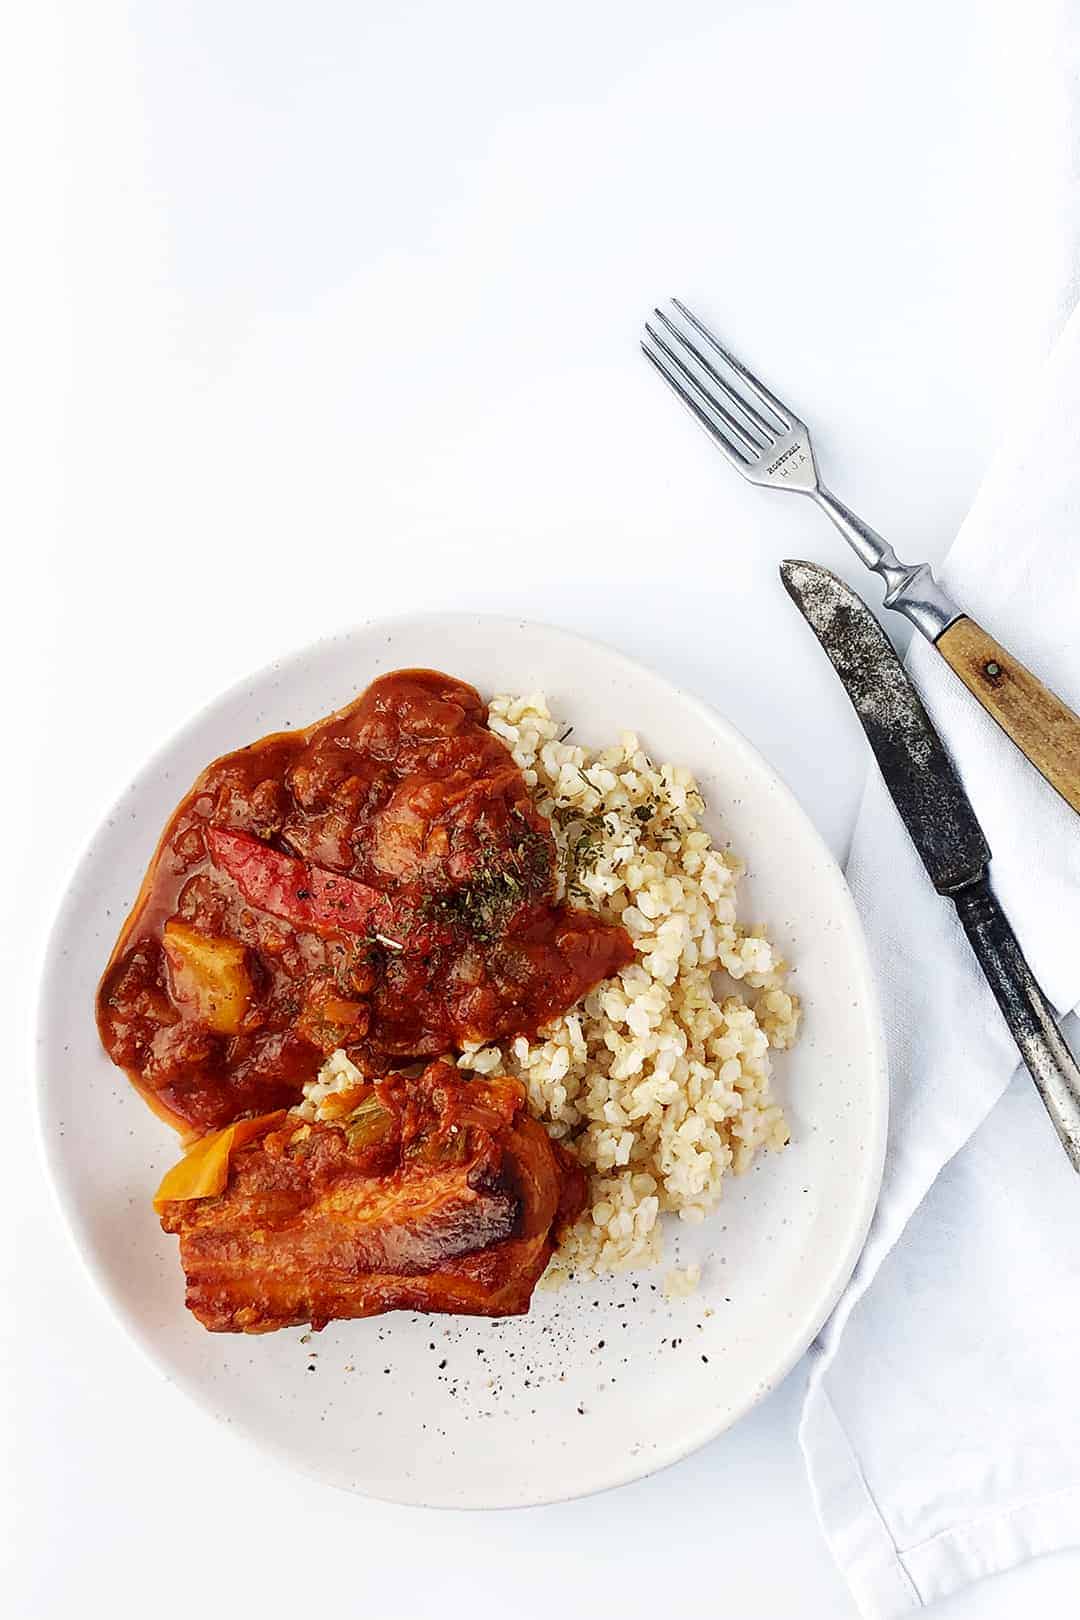 Slow cooked pork belly braised in tomato sauce